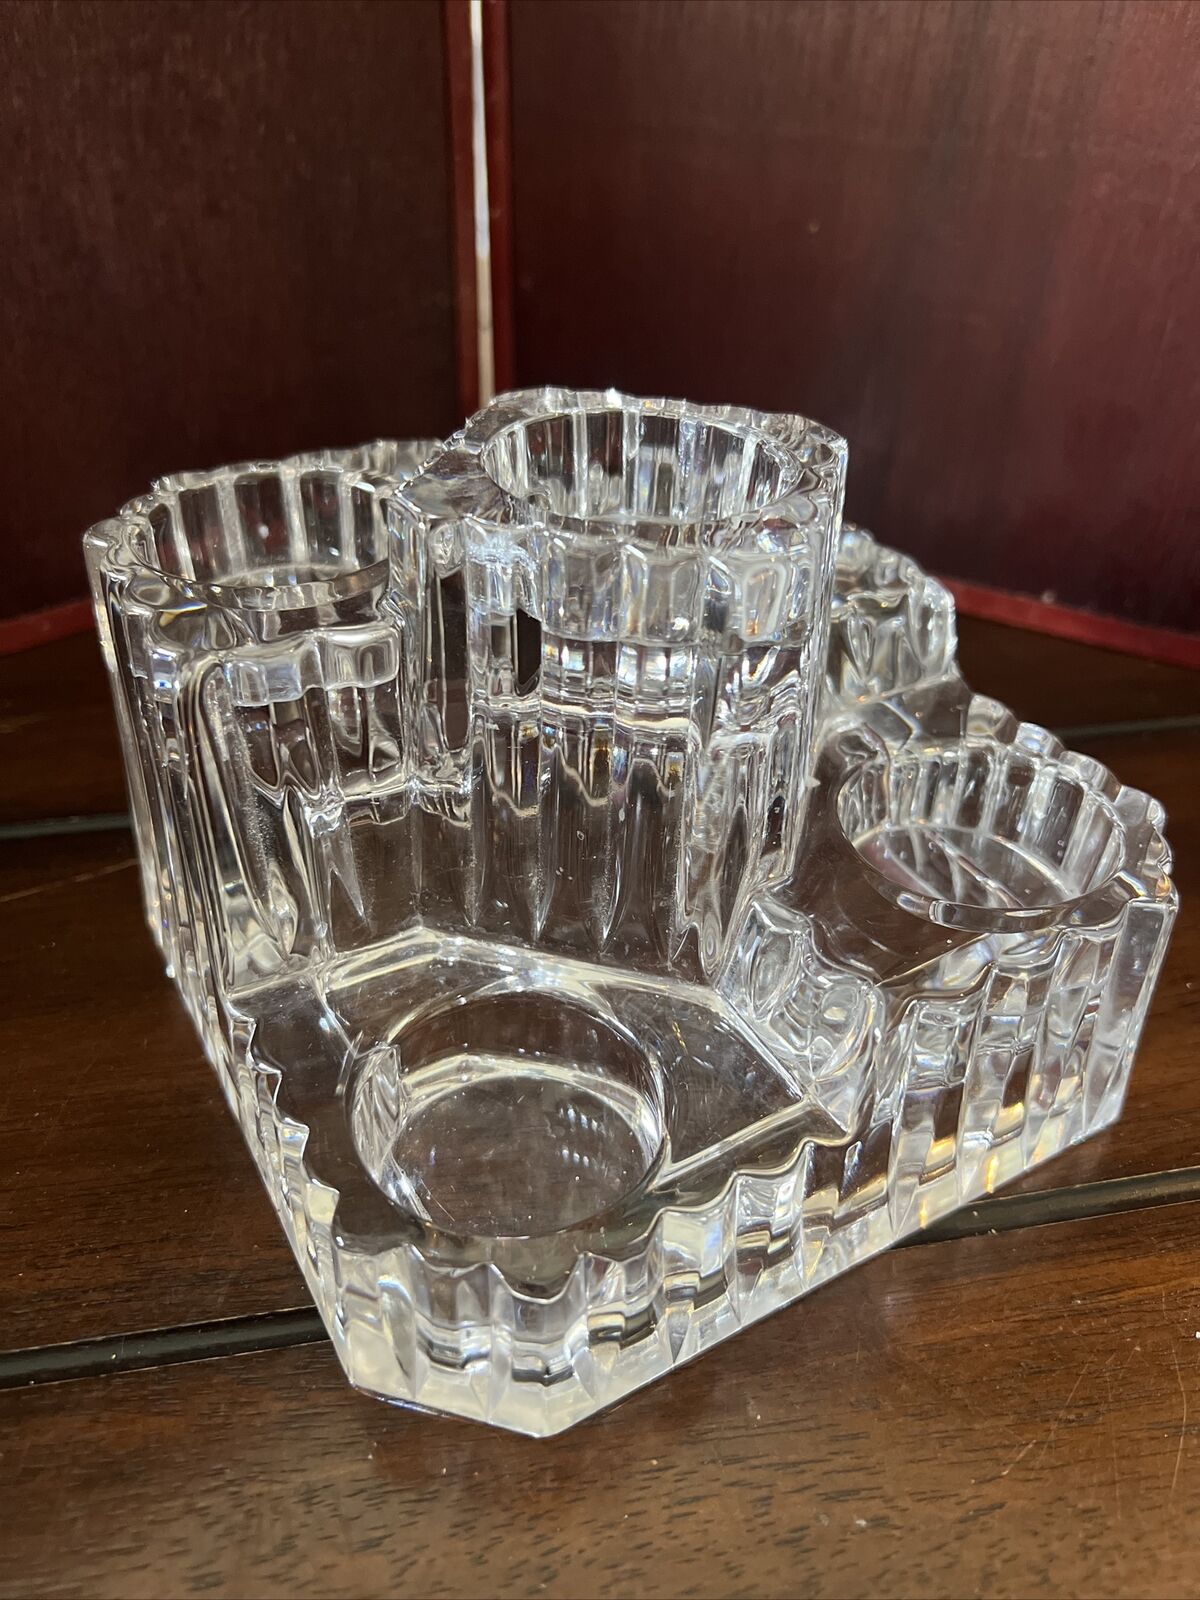 PARTYLITE Heavy 24 % Lead Crystal Castle Candle Holder 5 Tier Votives 6”x6”x4